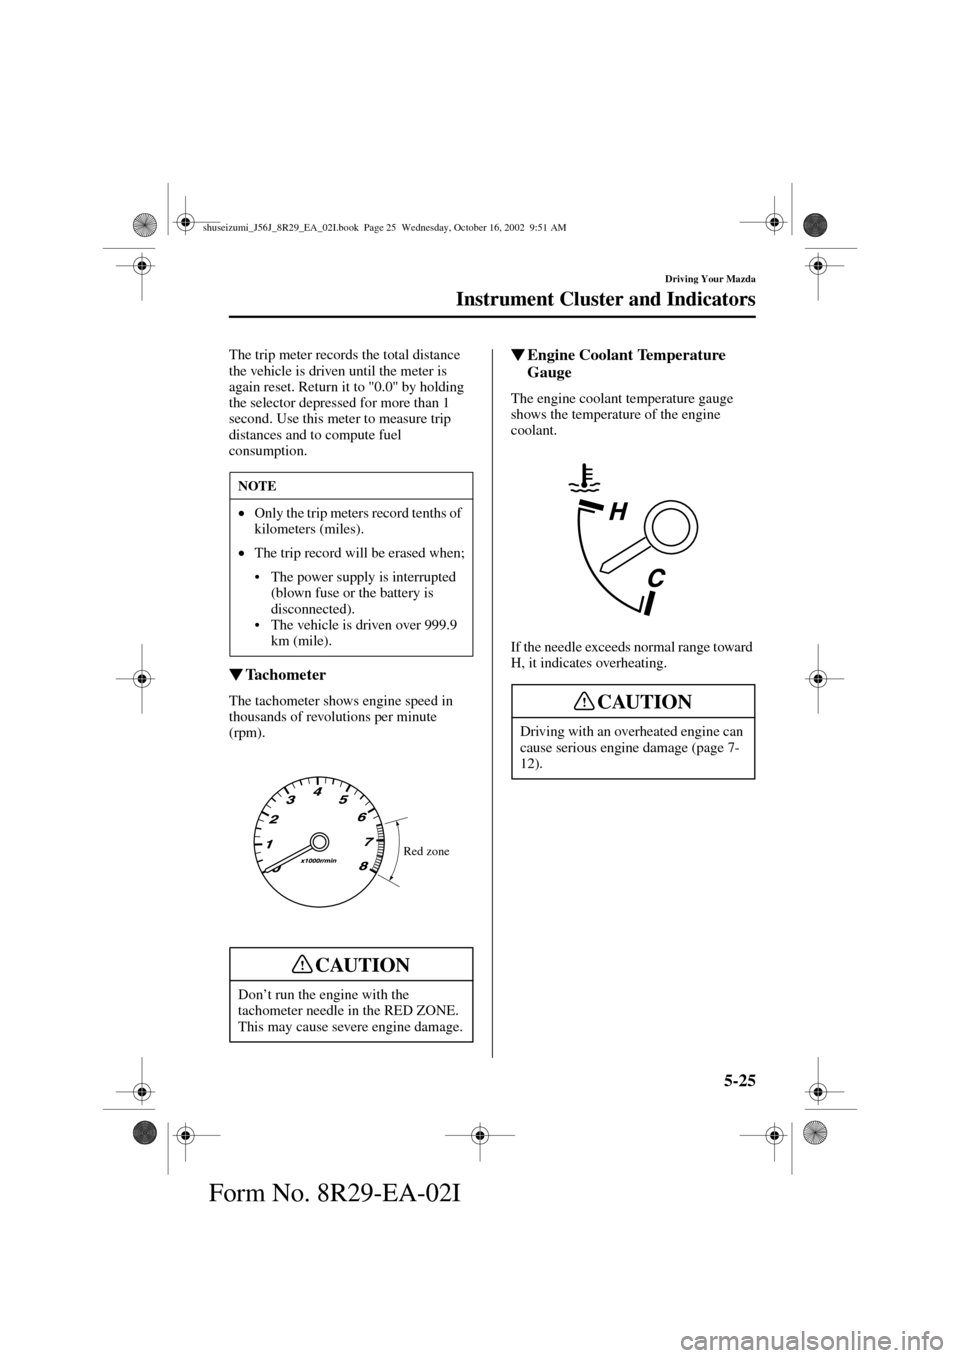 MAZDA MODEL 6 2003  Owners Manual (in English) 5-25
Driving Your Mazda
Instrument Cluster and Indicators
Form No. 8R29-EA-02I
The trip meter records the total distance 
the vehicle is driven until the meter is 
again reset. Return it to "0.0" by h